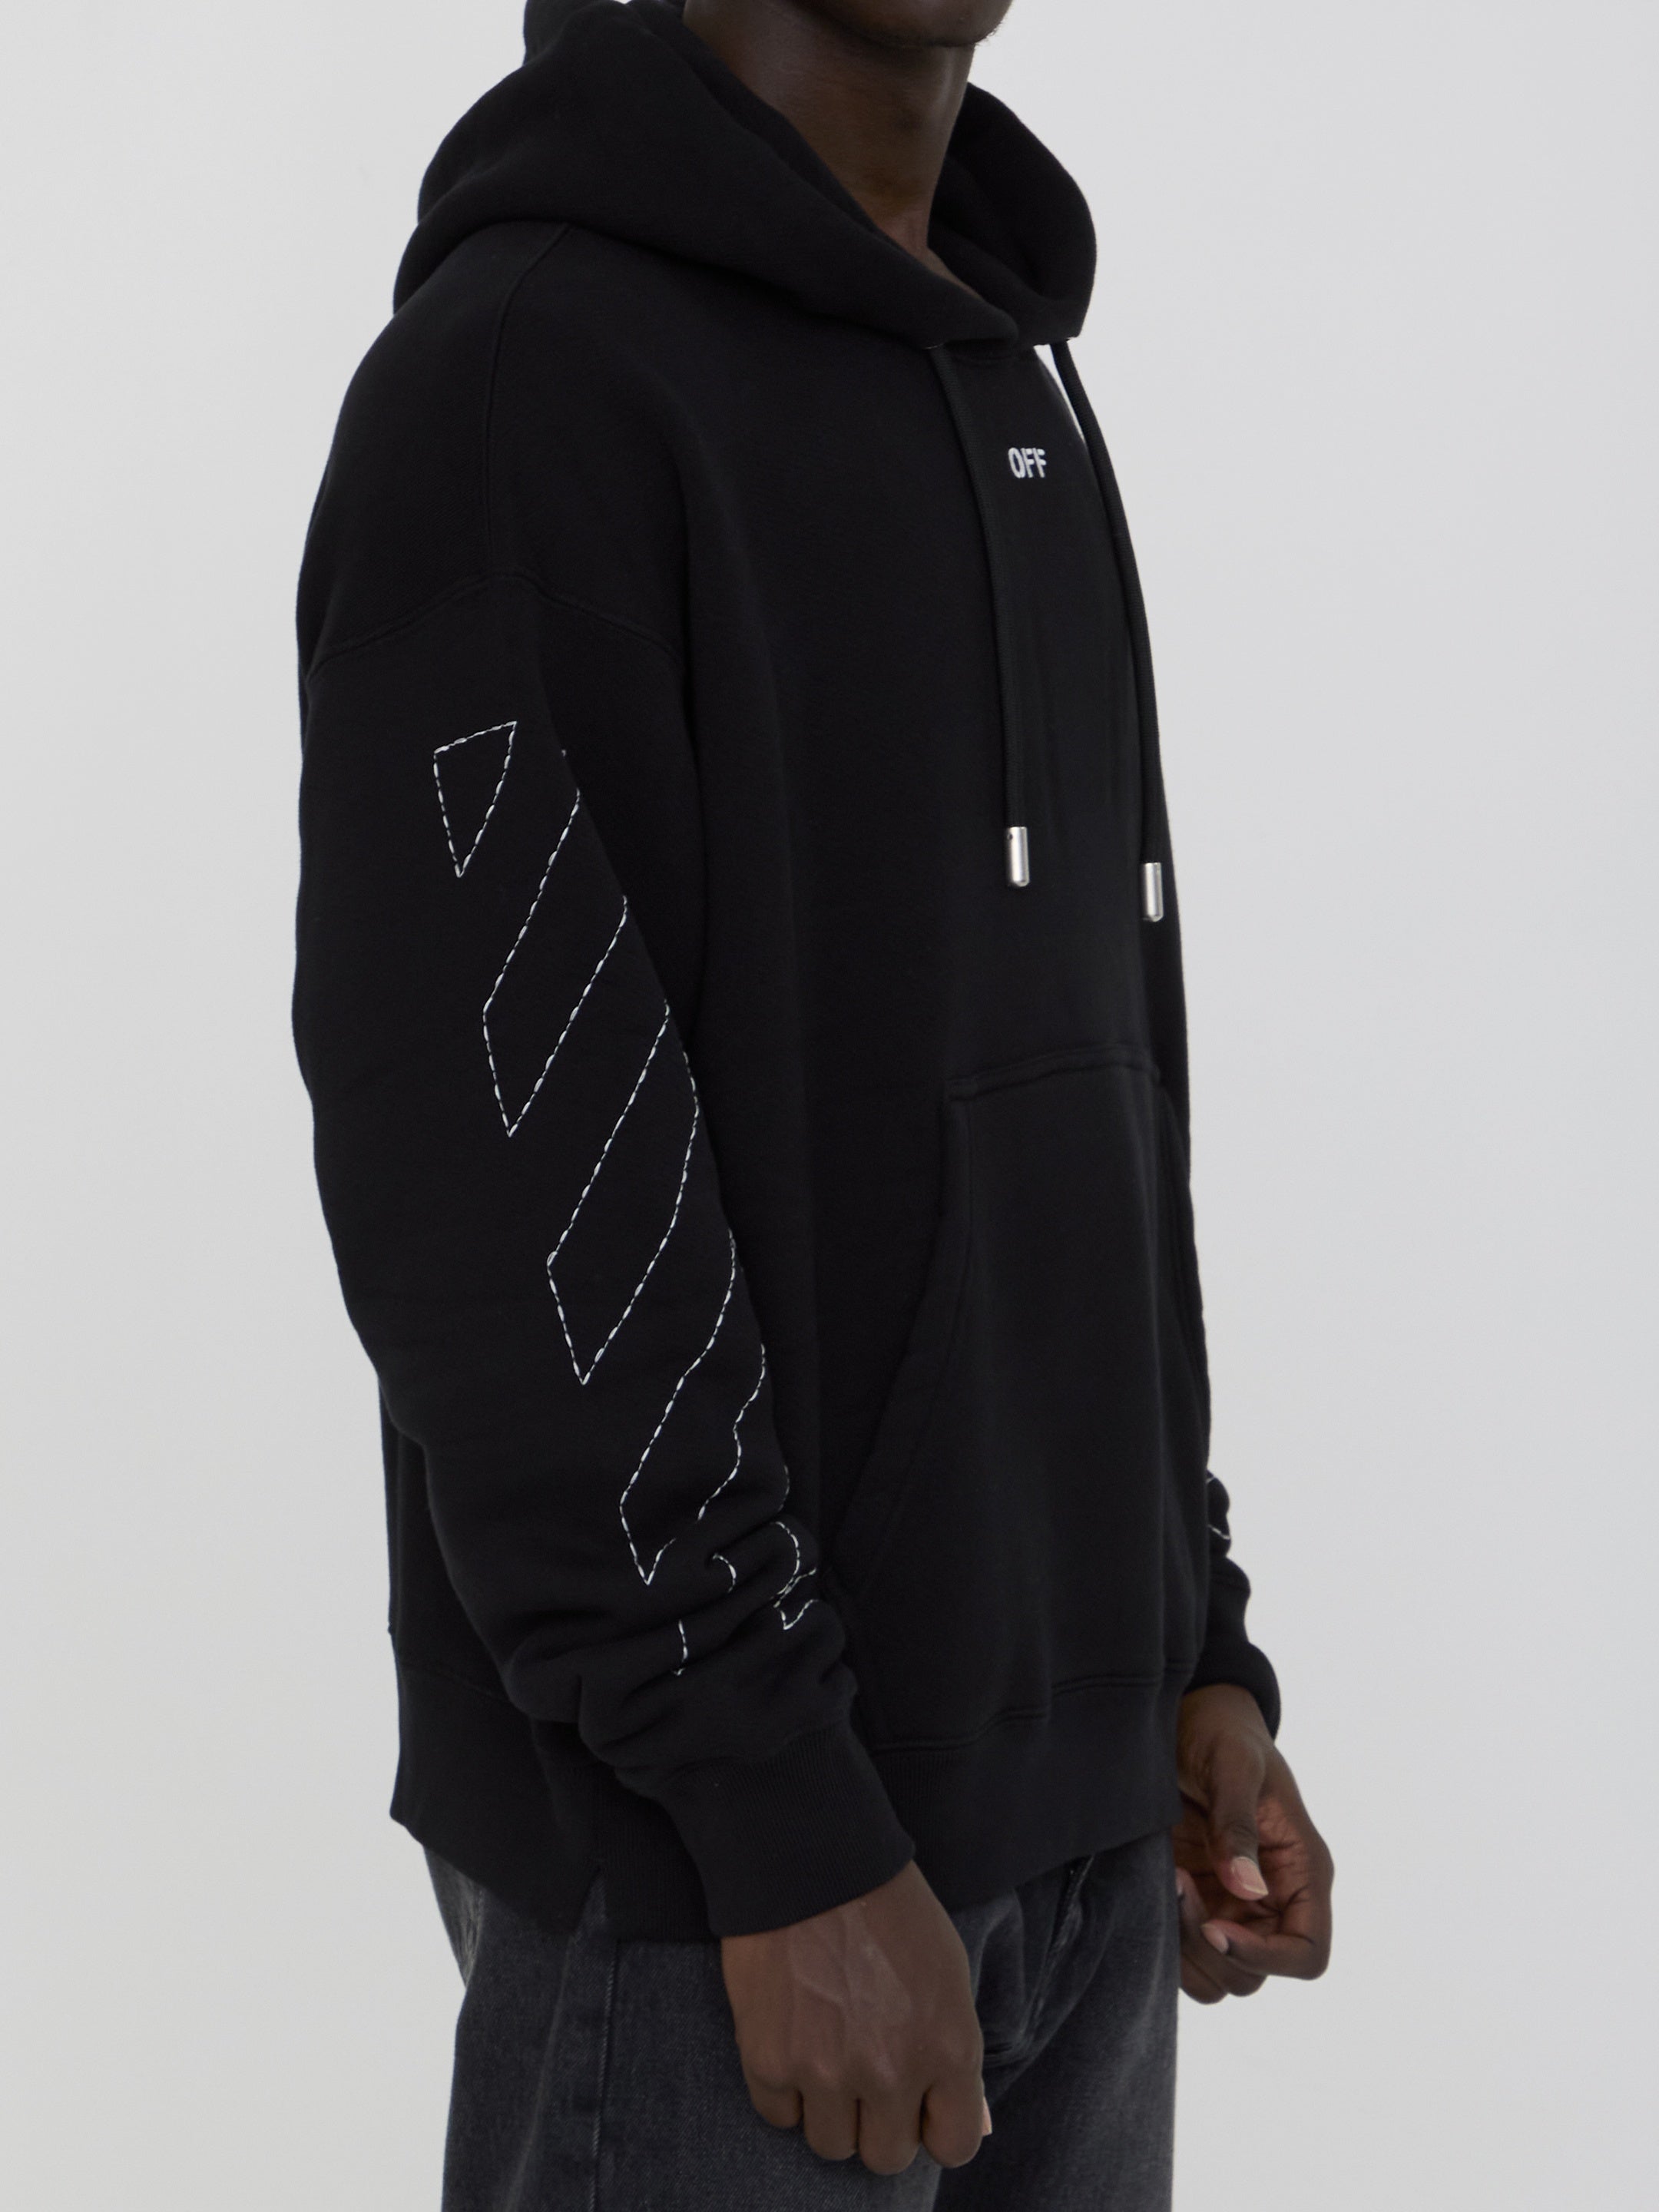 OFF-WHITE-OUTLET-SALE-Stitch-Arrow-Skate-hoodie-Strick-ARCHIVE-COLLECTION-2.jpg